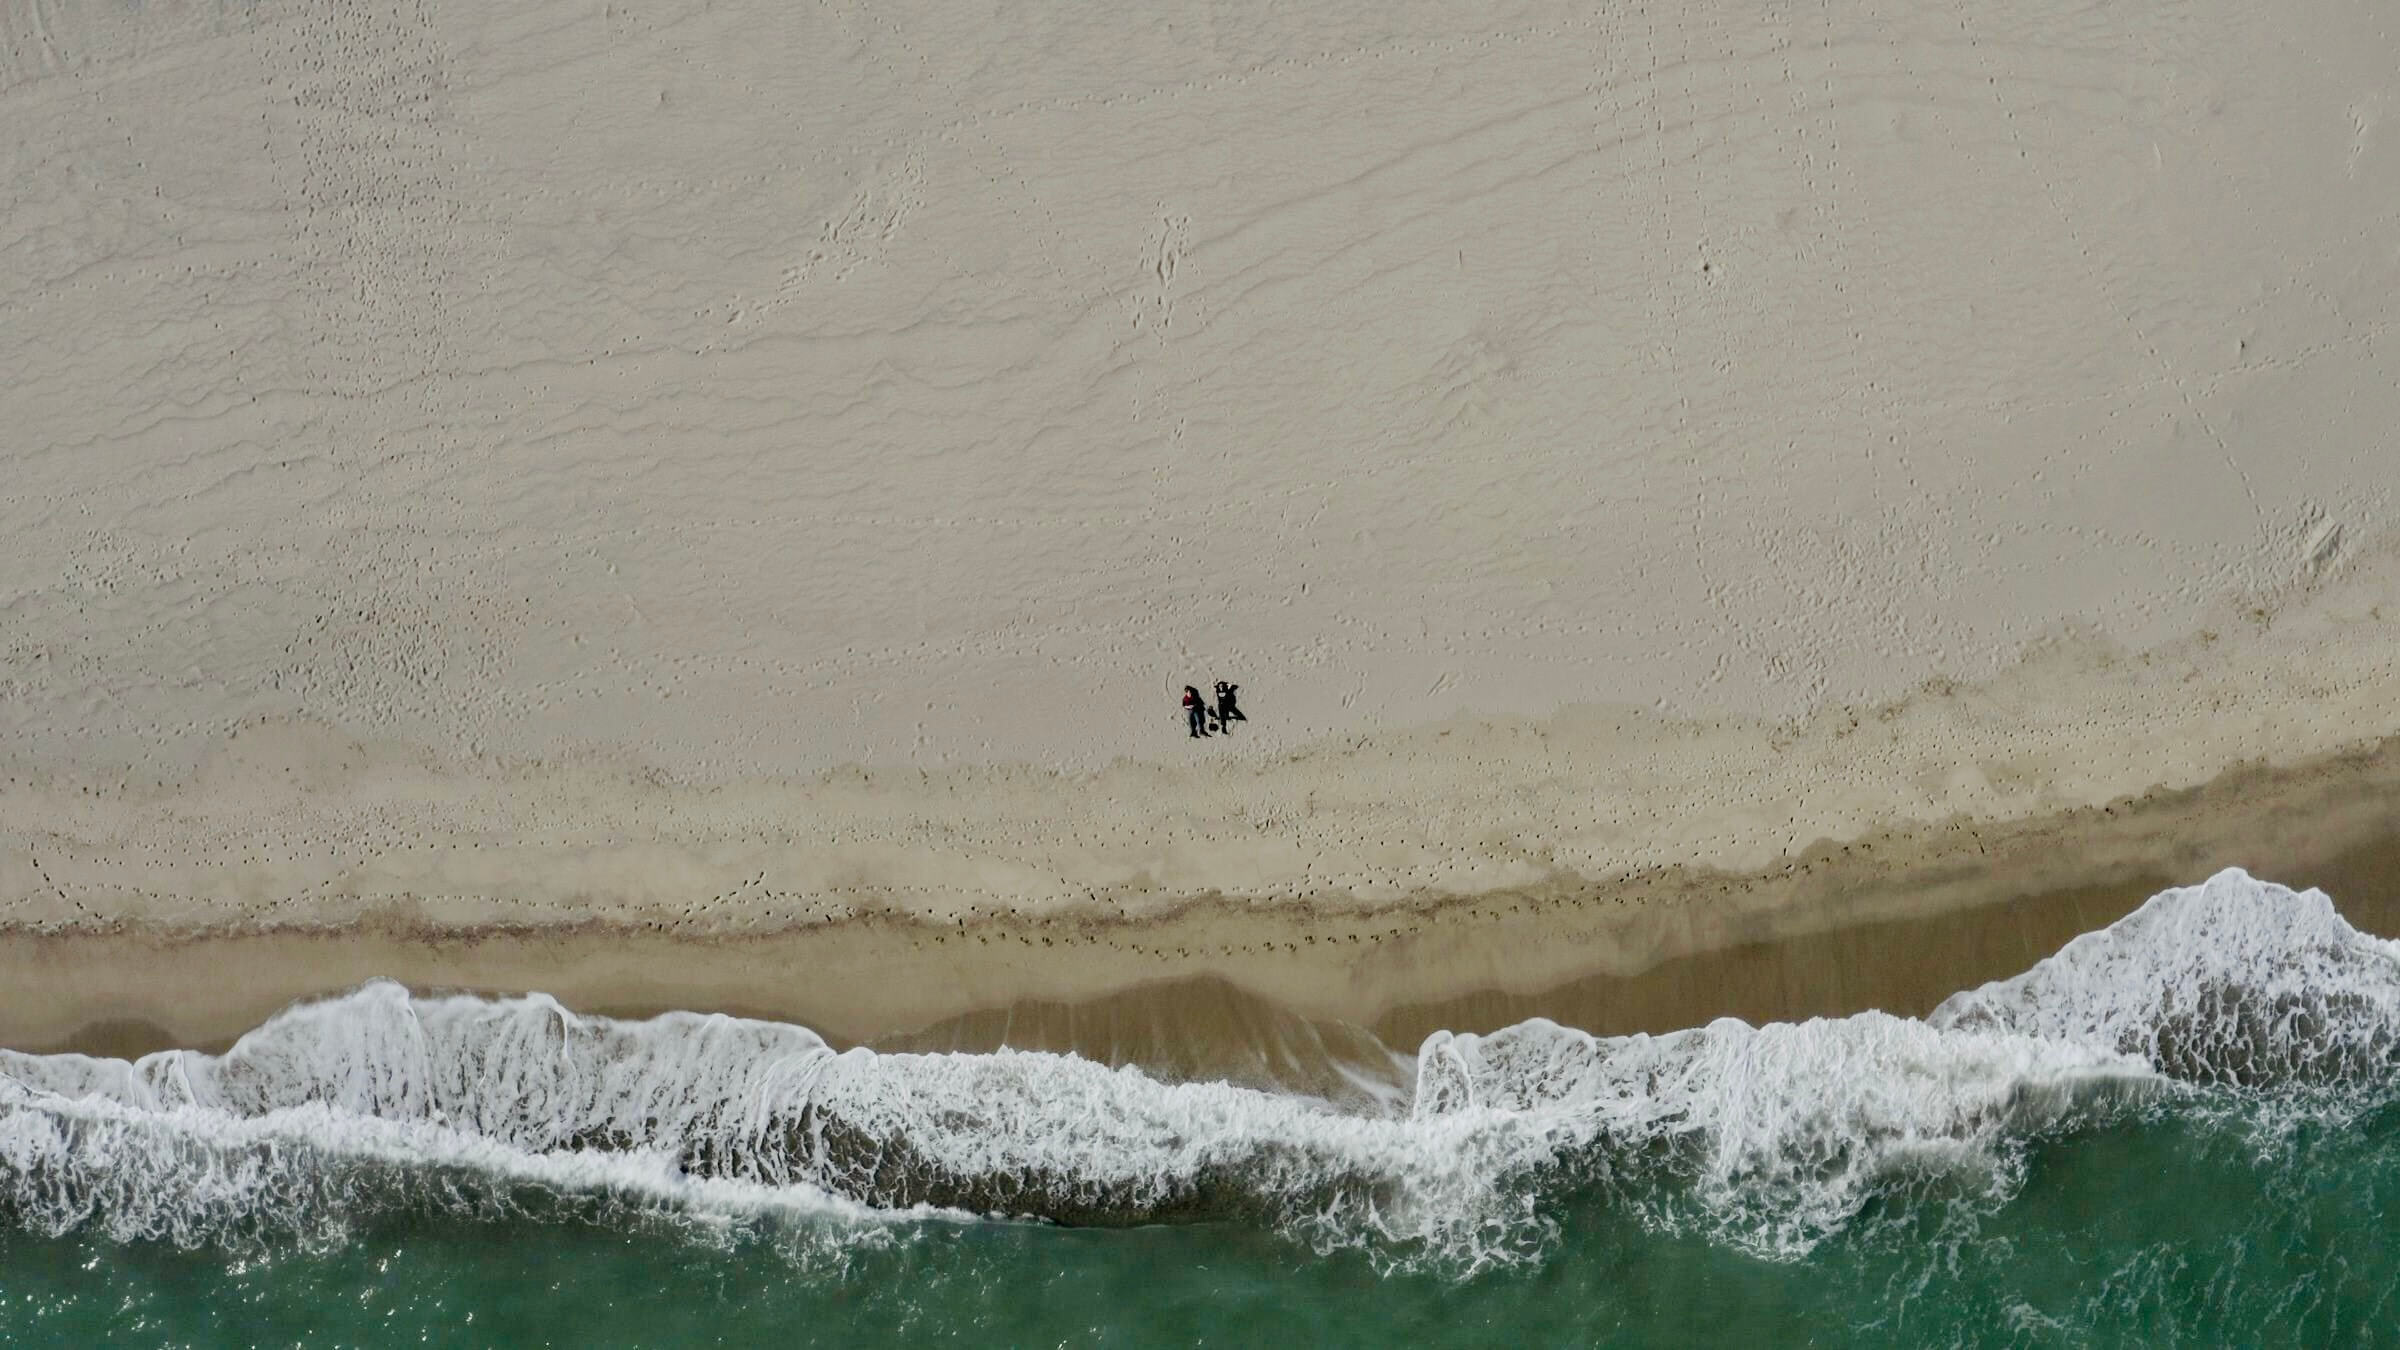 Still from Eskape. Overhead bird-eye view of a beach with waves and water along the bottom one-third. Two dark specks of people are lying on the beach, in the middle of the frame.